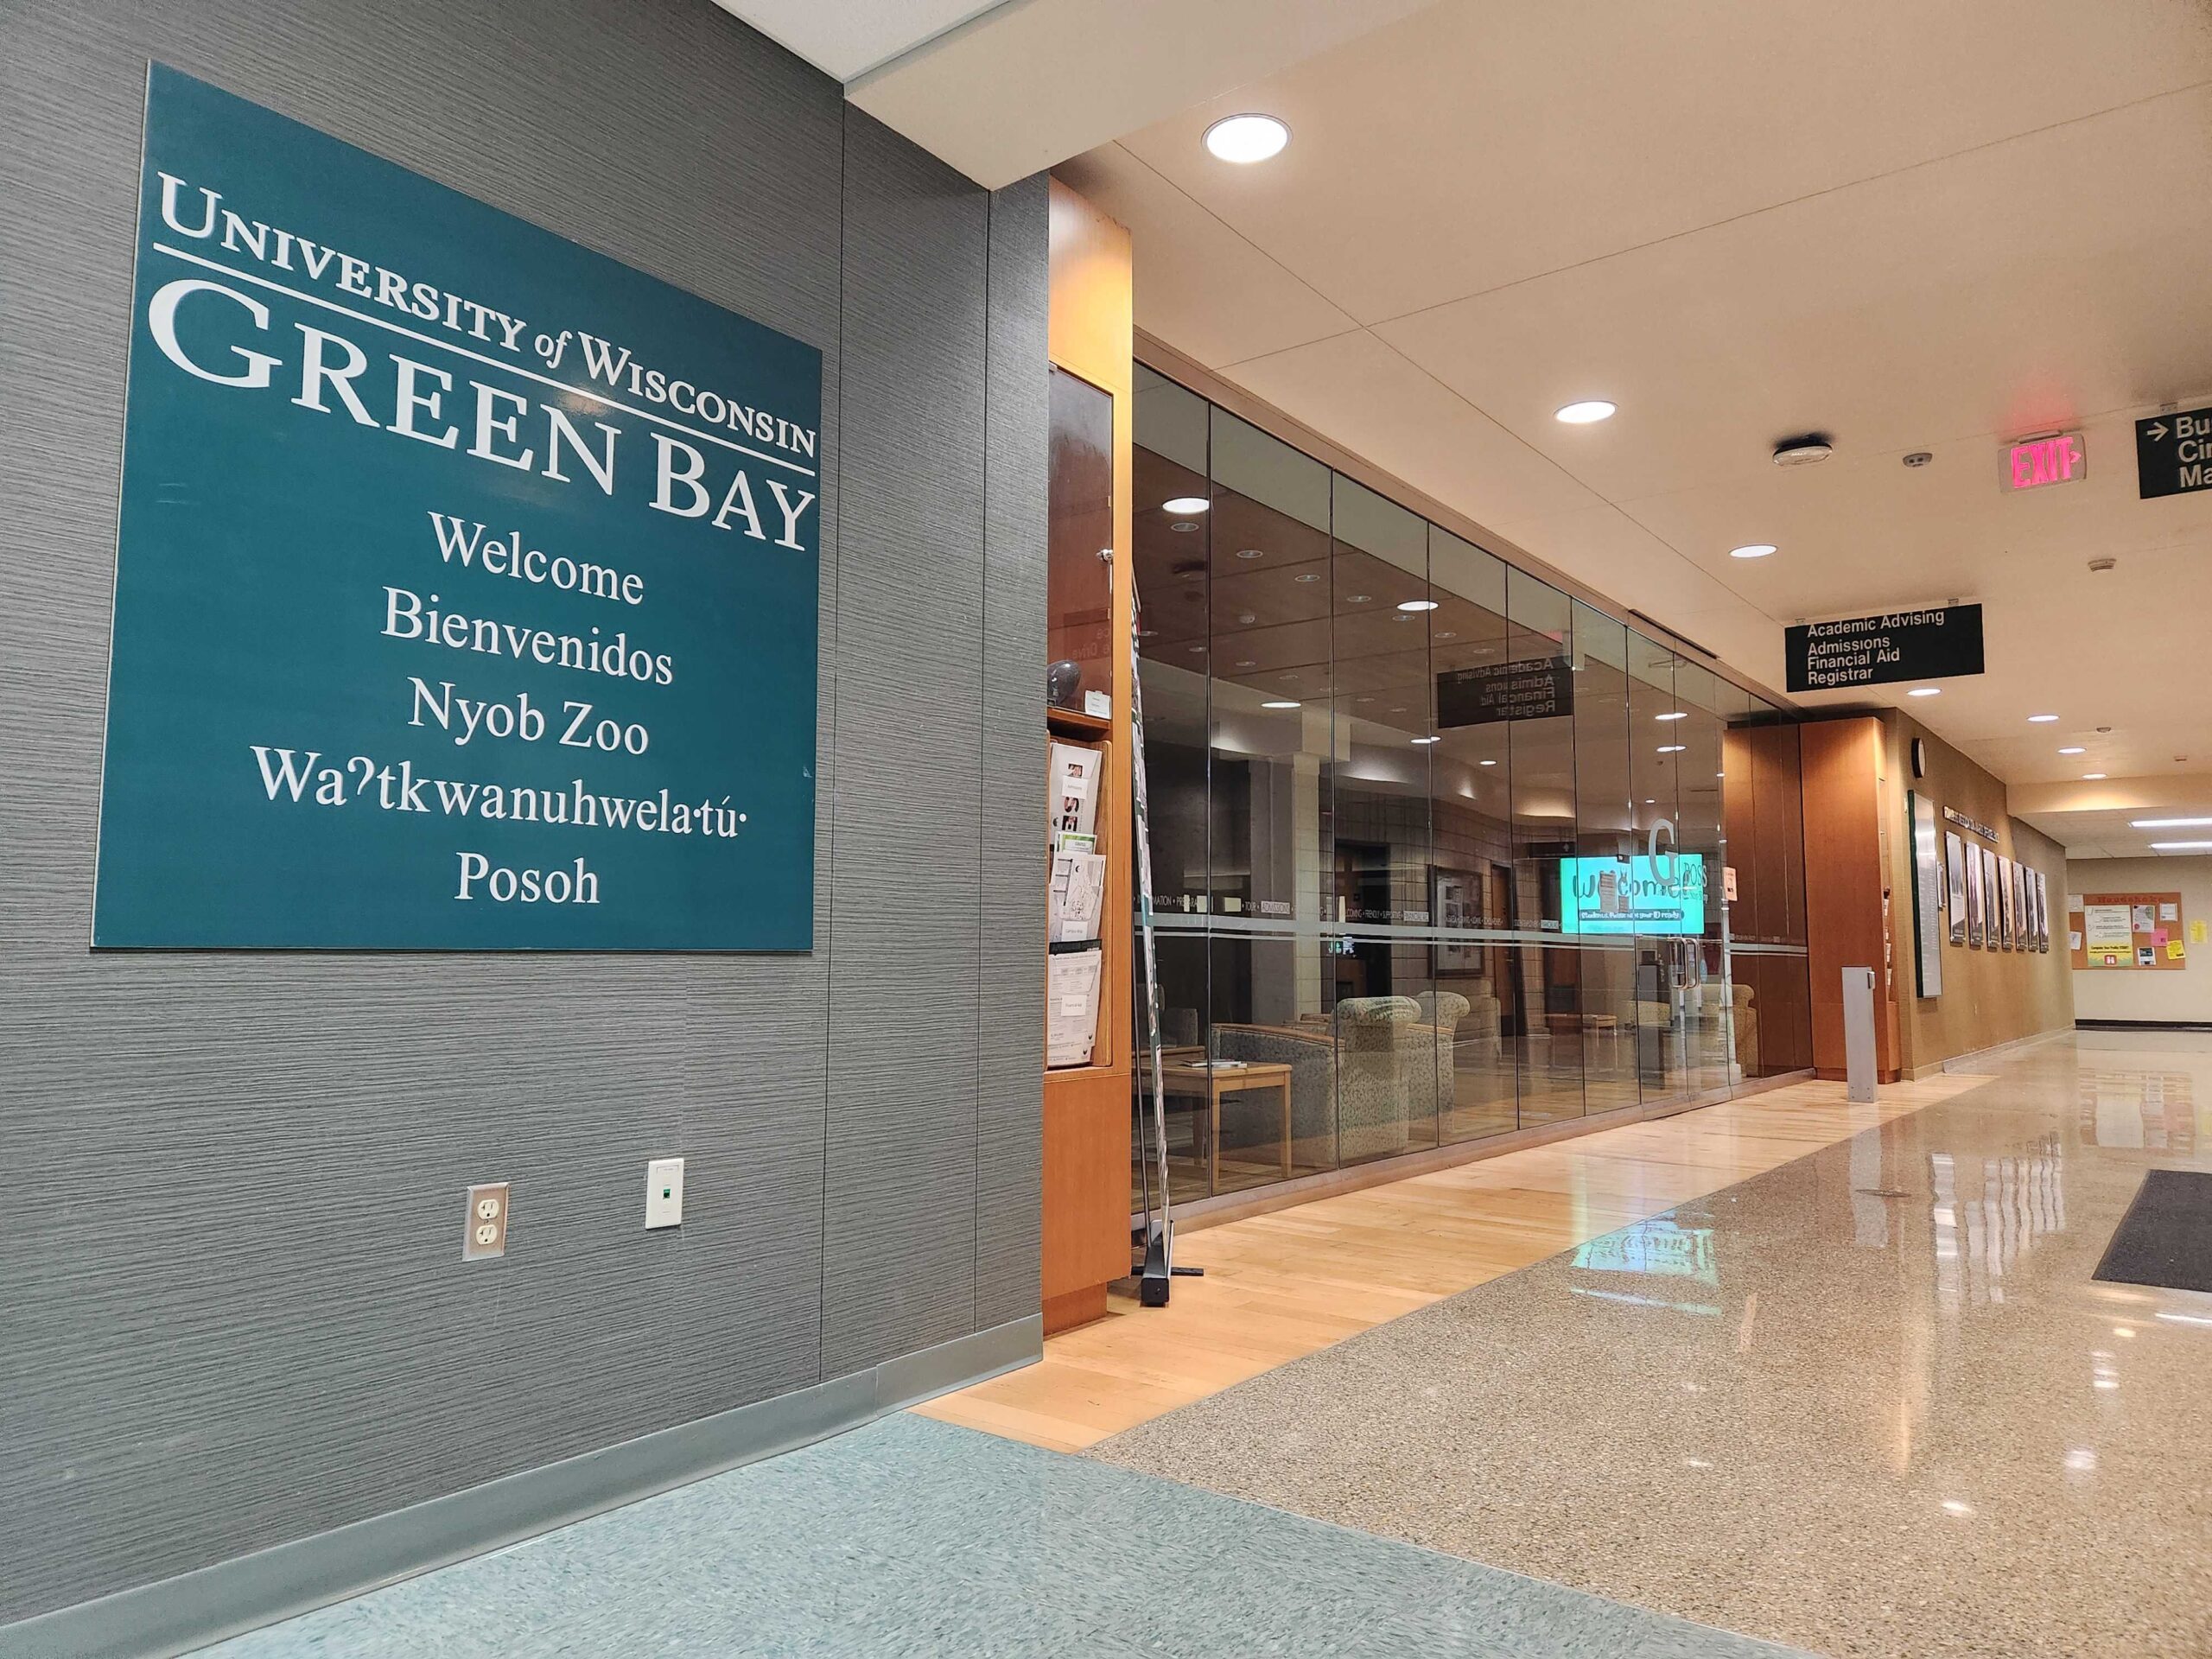 UW-Green Bay considers discontinuing programs, citing student demand and budget constraints